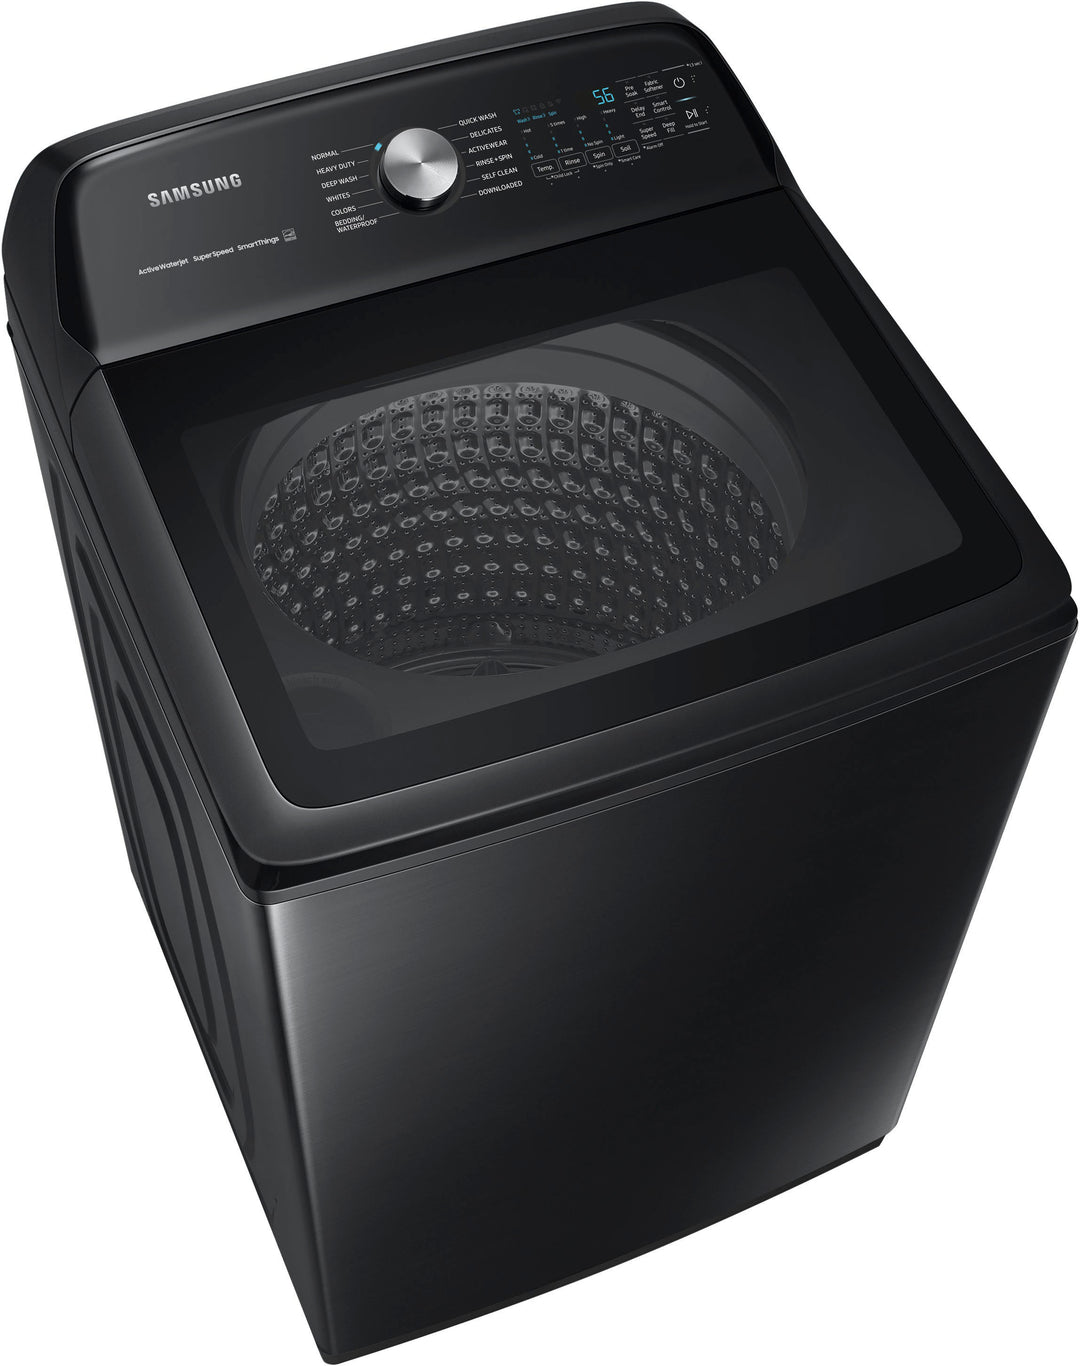 Samsung - 5.2 cu. ft. Large Capacity Smart Top Load Washer with Super Speed Wash - Brushed Black_6